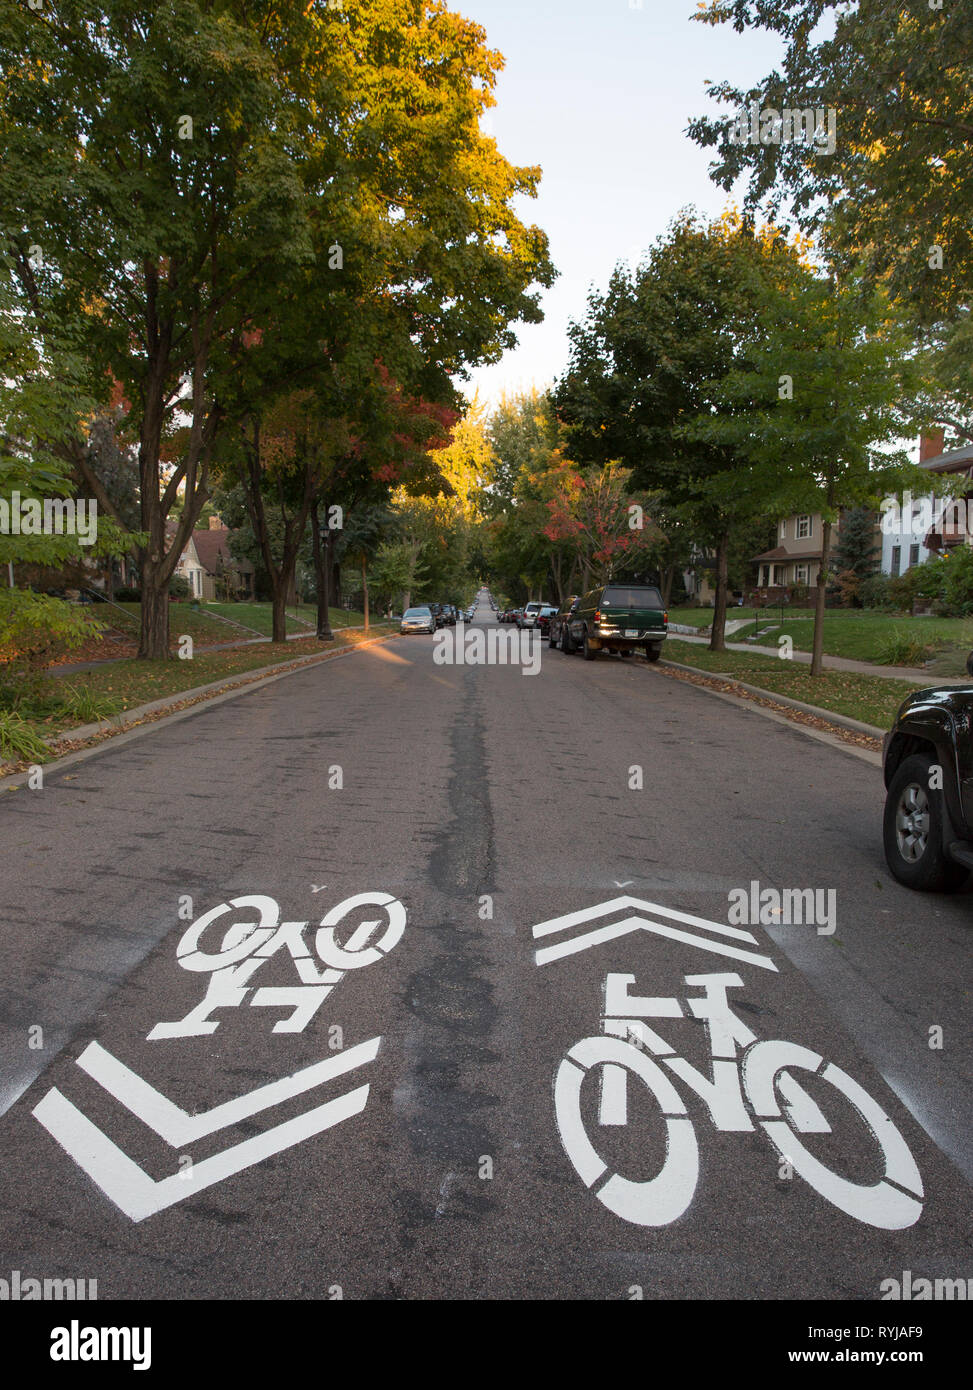 A shared-lane marking or sharrow marking for a bicycle route on Jefferson Avenue in St. Paul, Minnesota.  In the US, the wide shape of the arrow combi Stock Photo